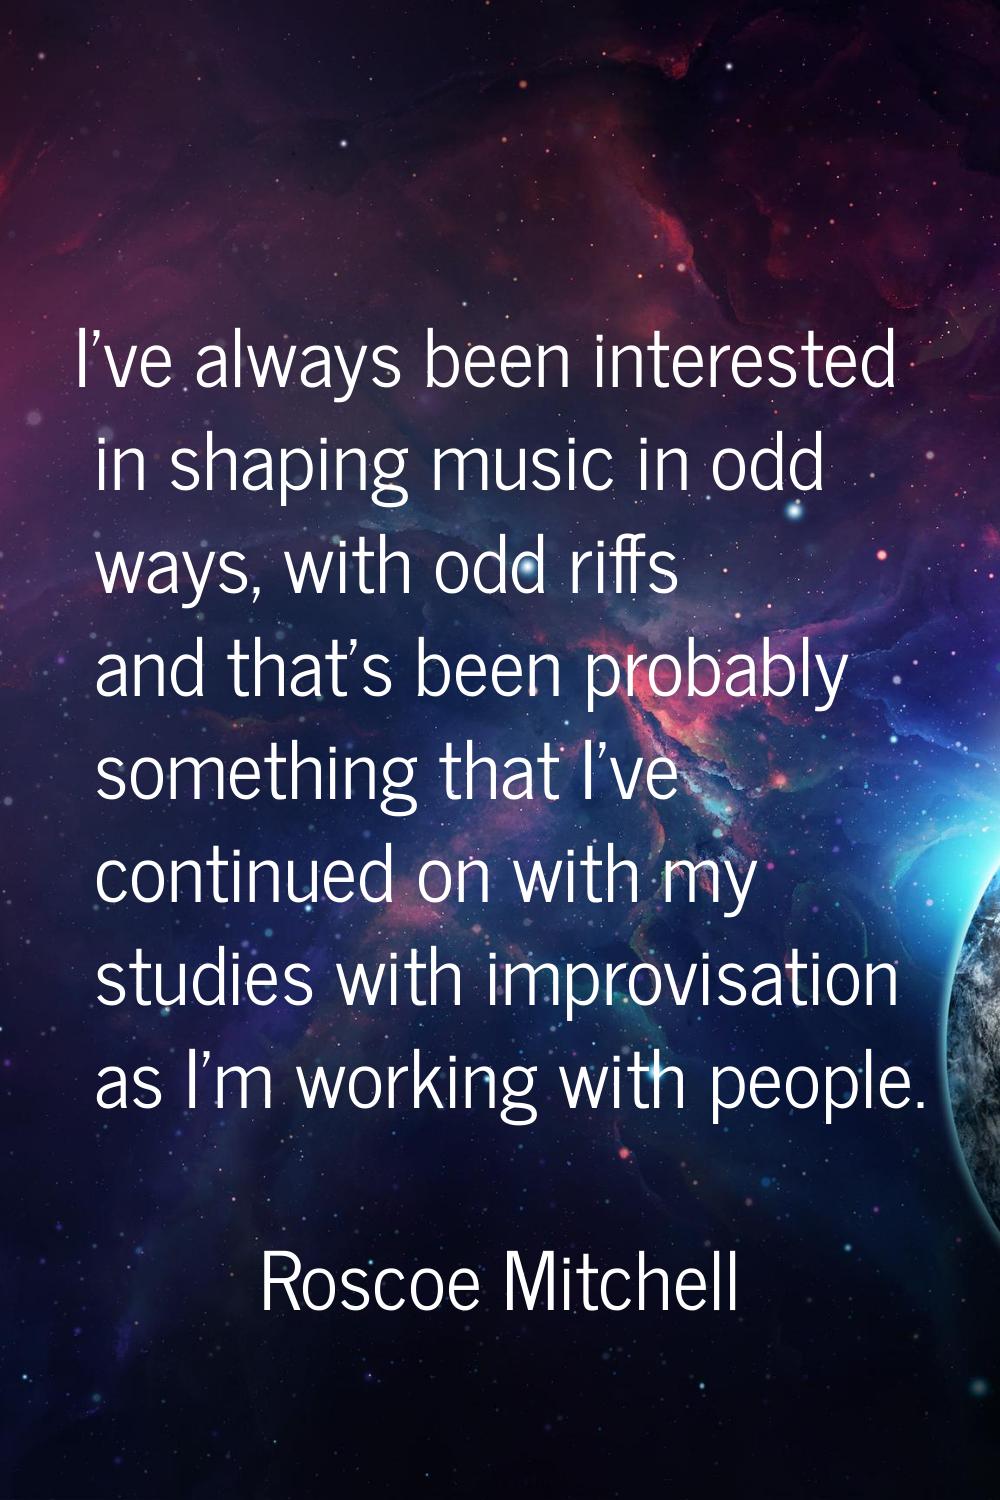 I've always been interested in shaping music in odd ways, with odd riffs and that's been probably s